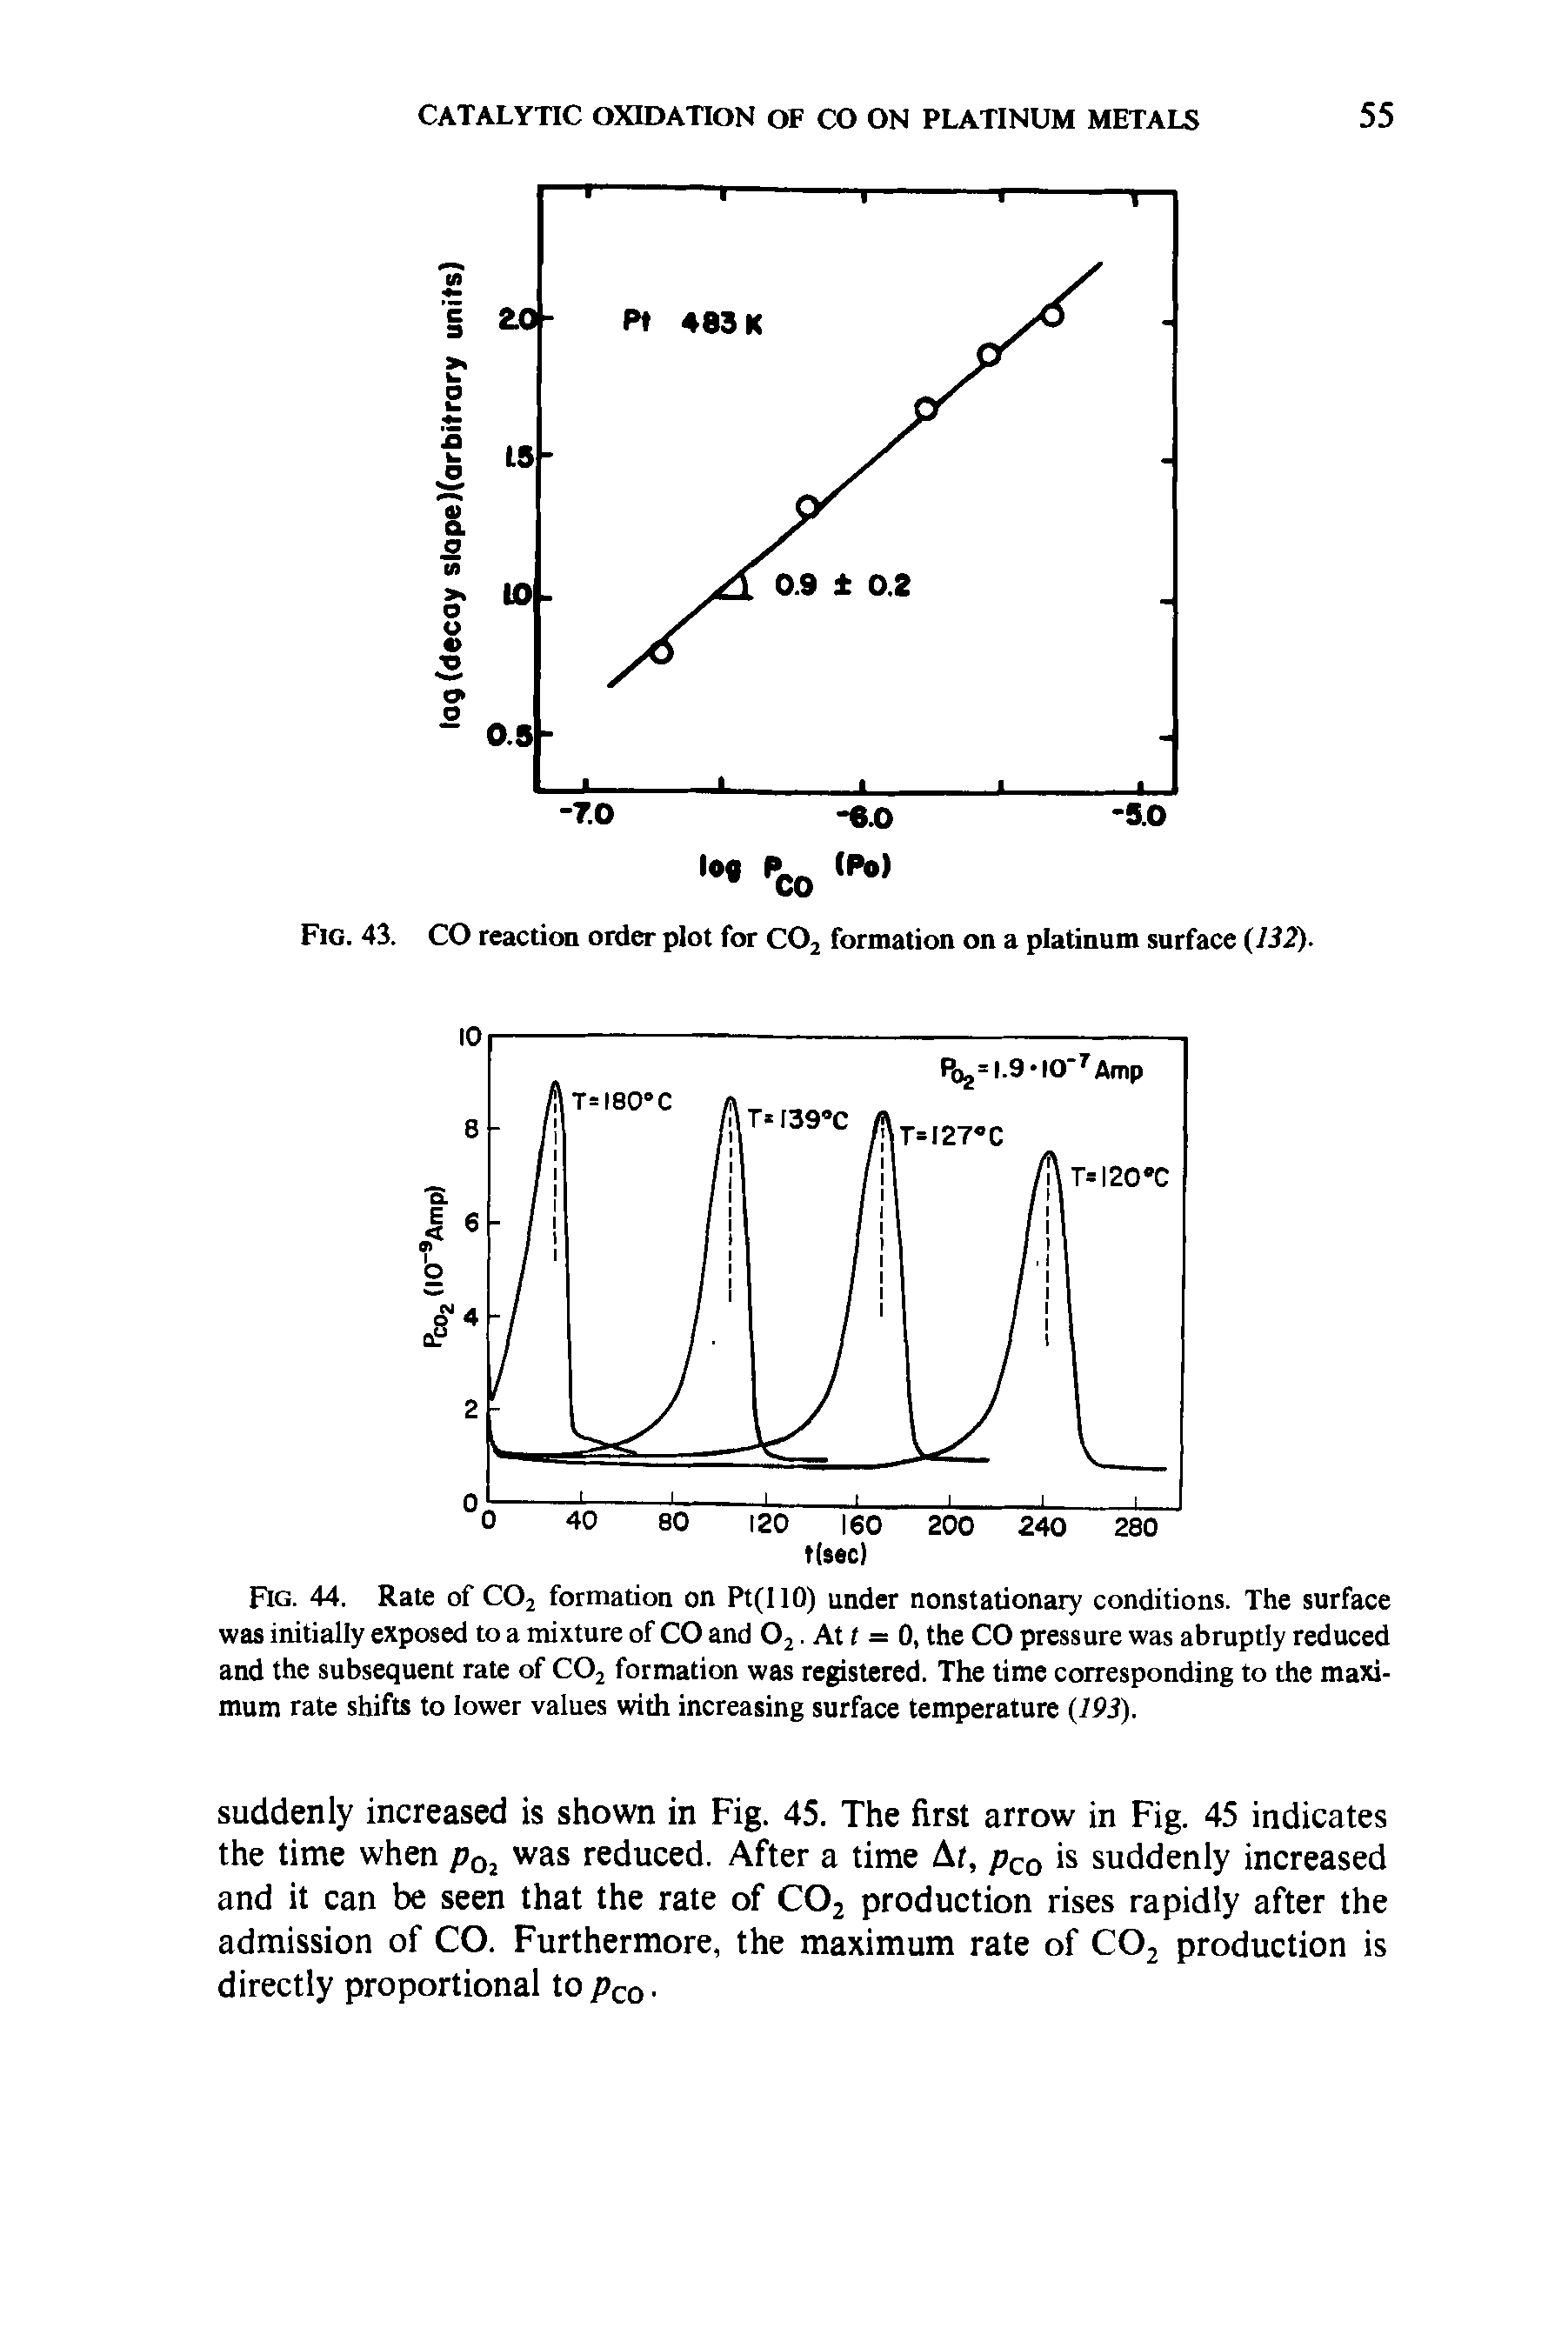 Fig. 44. Rate of C02 formation on Pt(I10) under nonstationary conditions. The surface was initially exposed to a mixture of CO and 02. At t = 0, the CO pressure was abruptly reduced and the subsequent rate of C02 formation was registered. The time corresponding to the maximum rate shifts to lower values with increasing surface temperature (193).